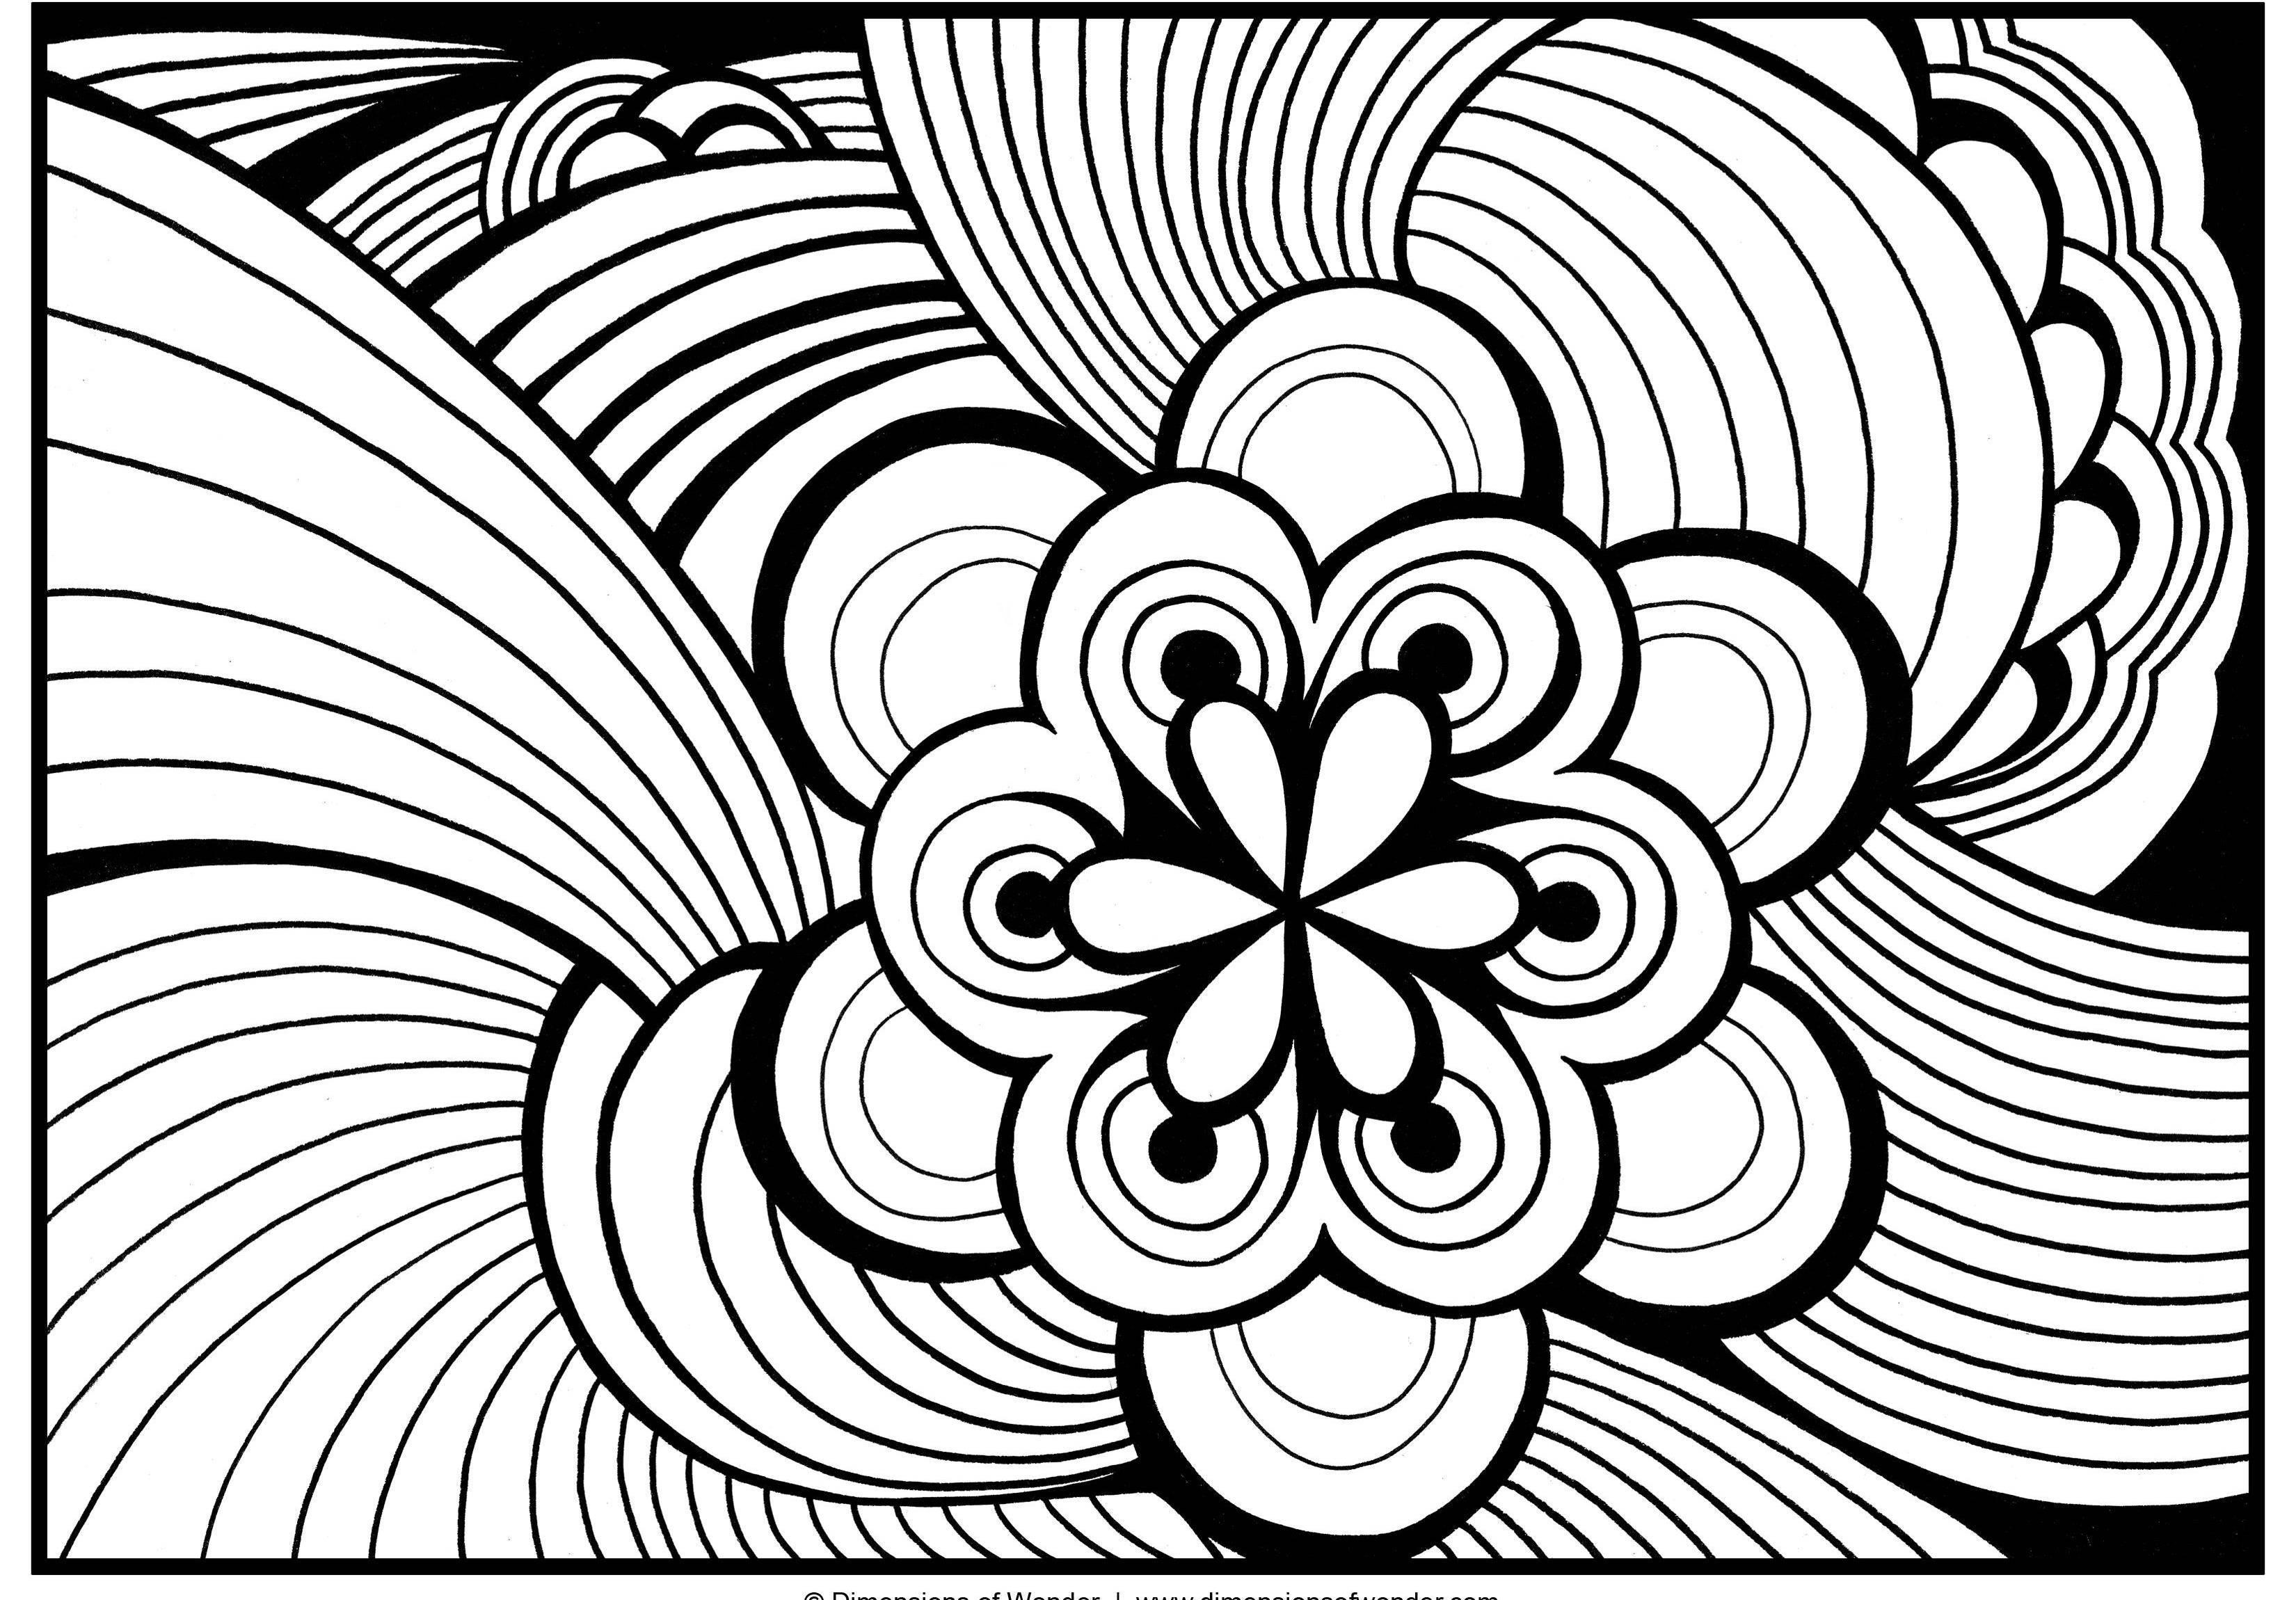 Cool Printable Coloring Pages For Adults At Getdrawings | Free Download